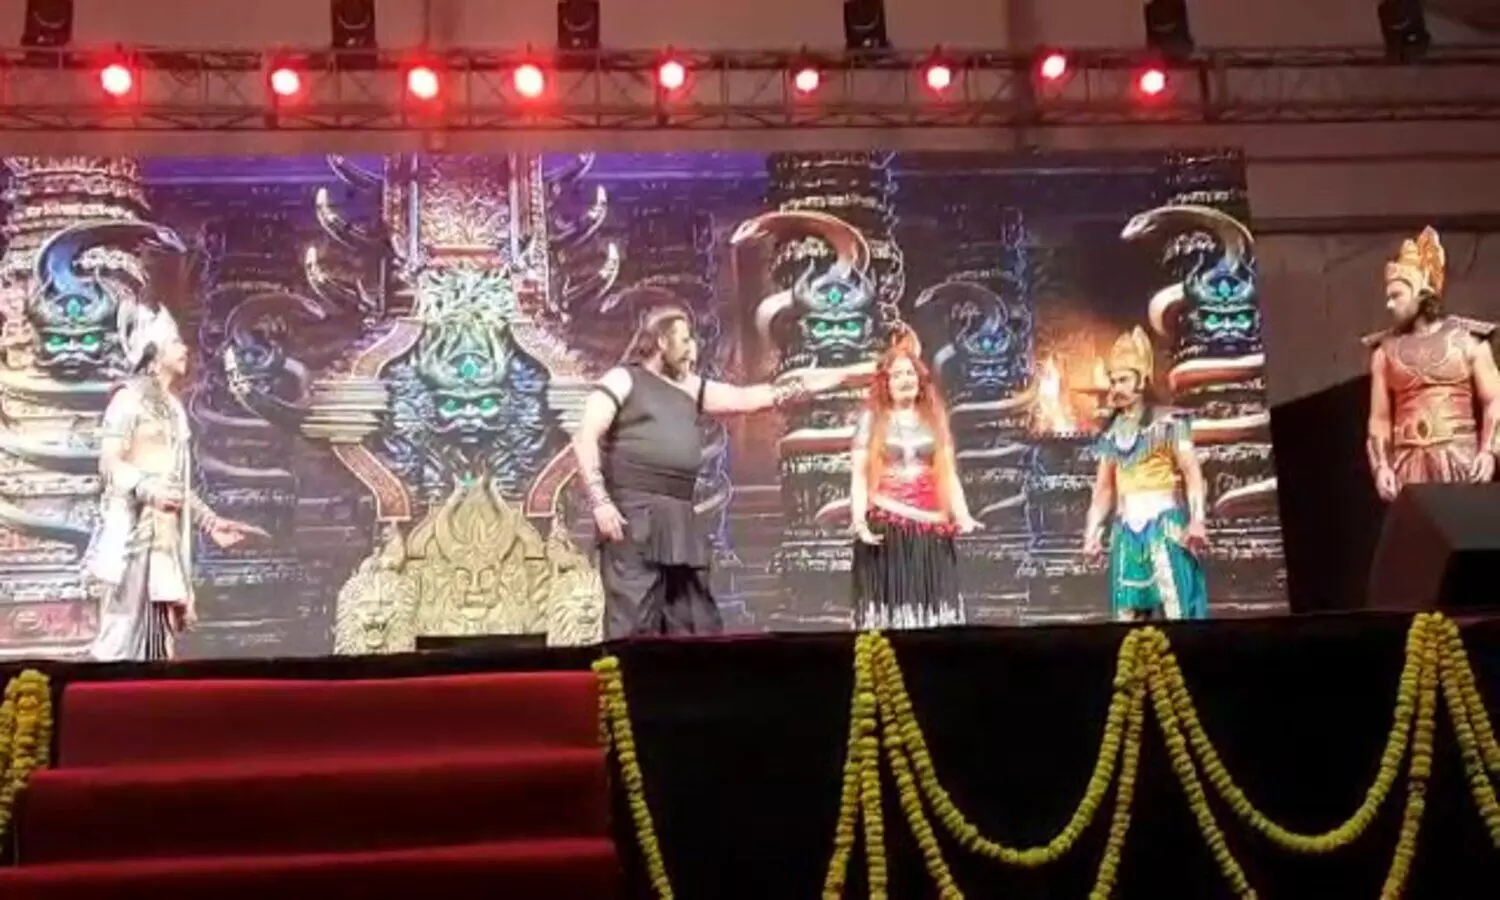 Ramcharitmanas performed by artists